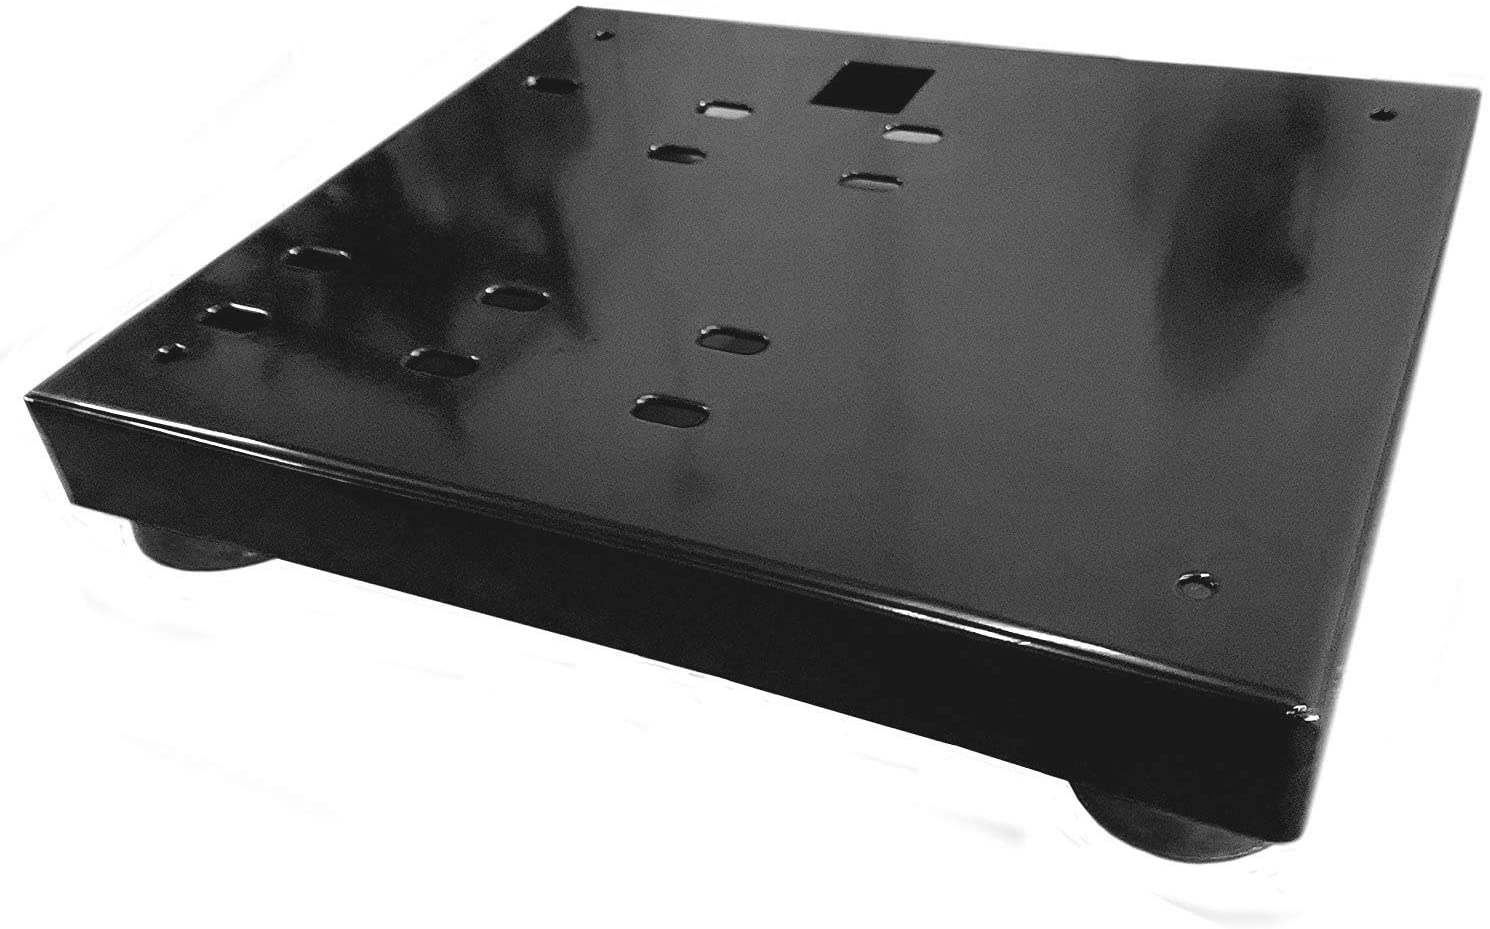 Pressure Washer Skid Mount Plate Frame, Powder Coated Steel with Rubber Feet